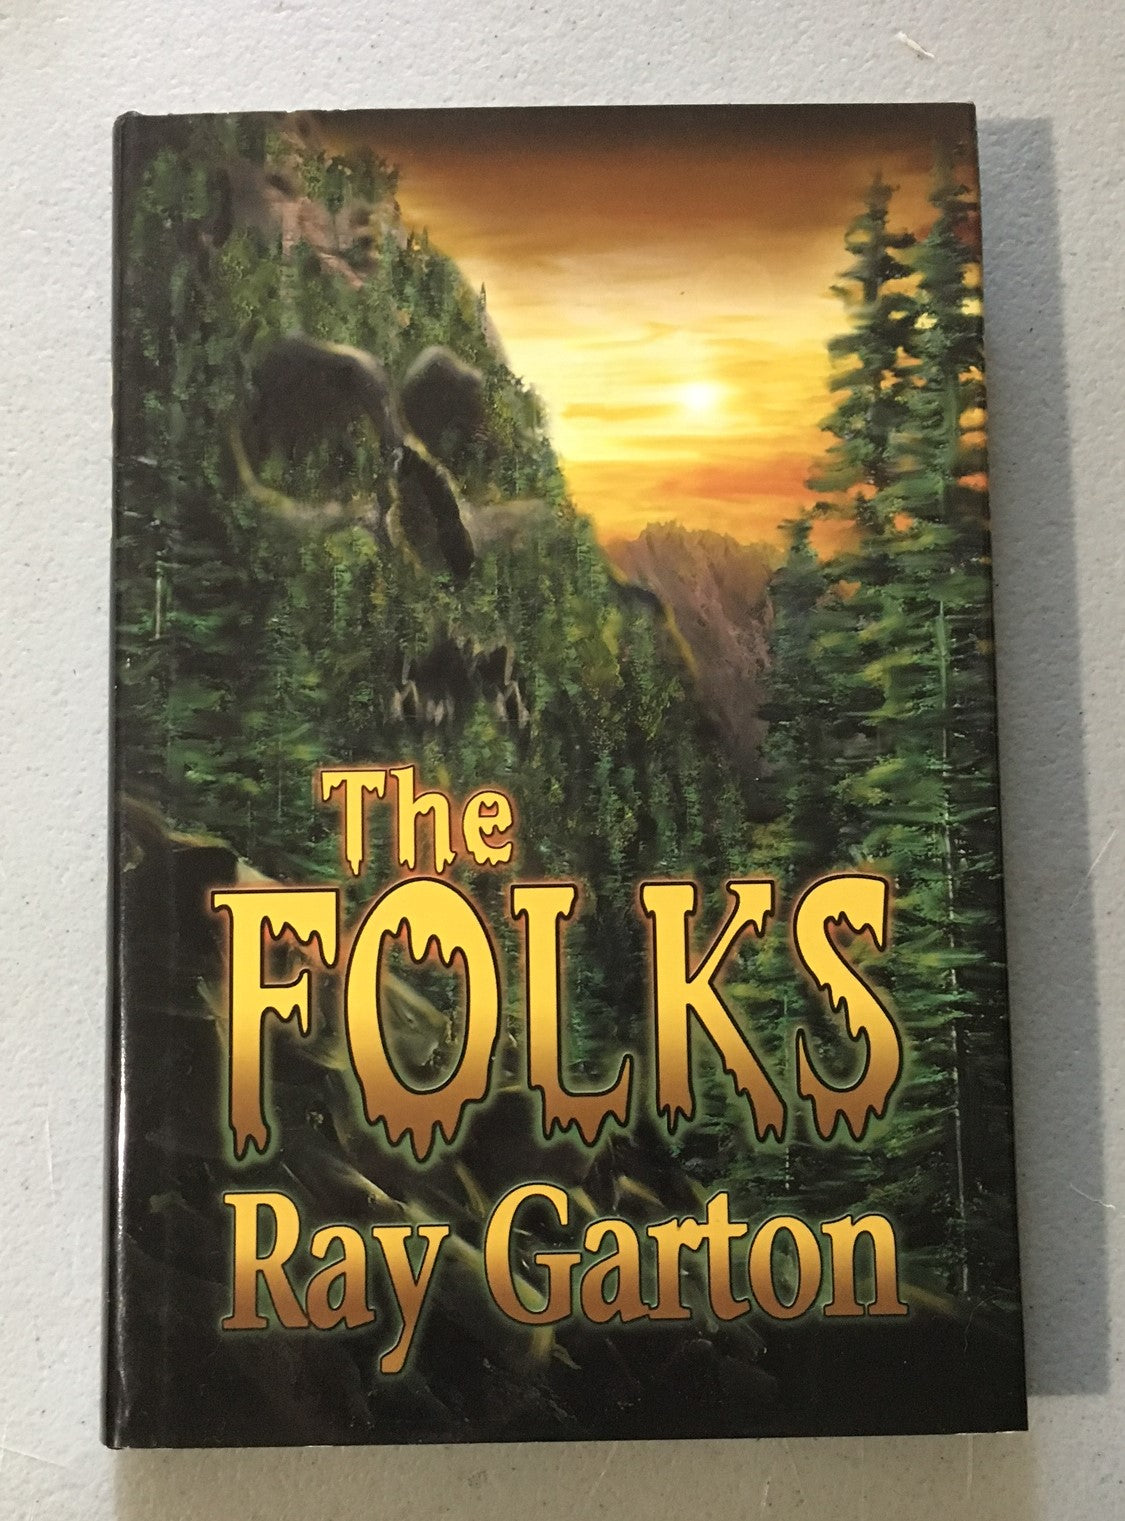 The Folks by Ray Garton  (Rare signed limited HC - Cemetery Dance)